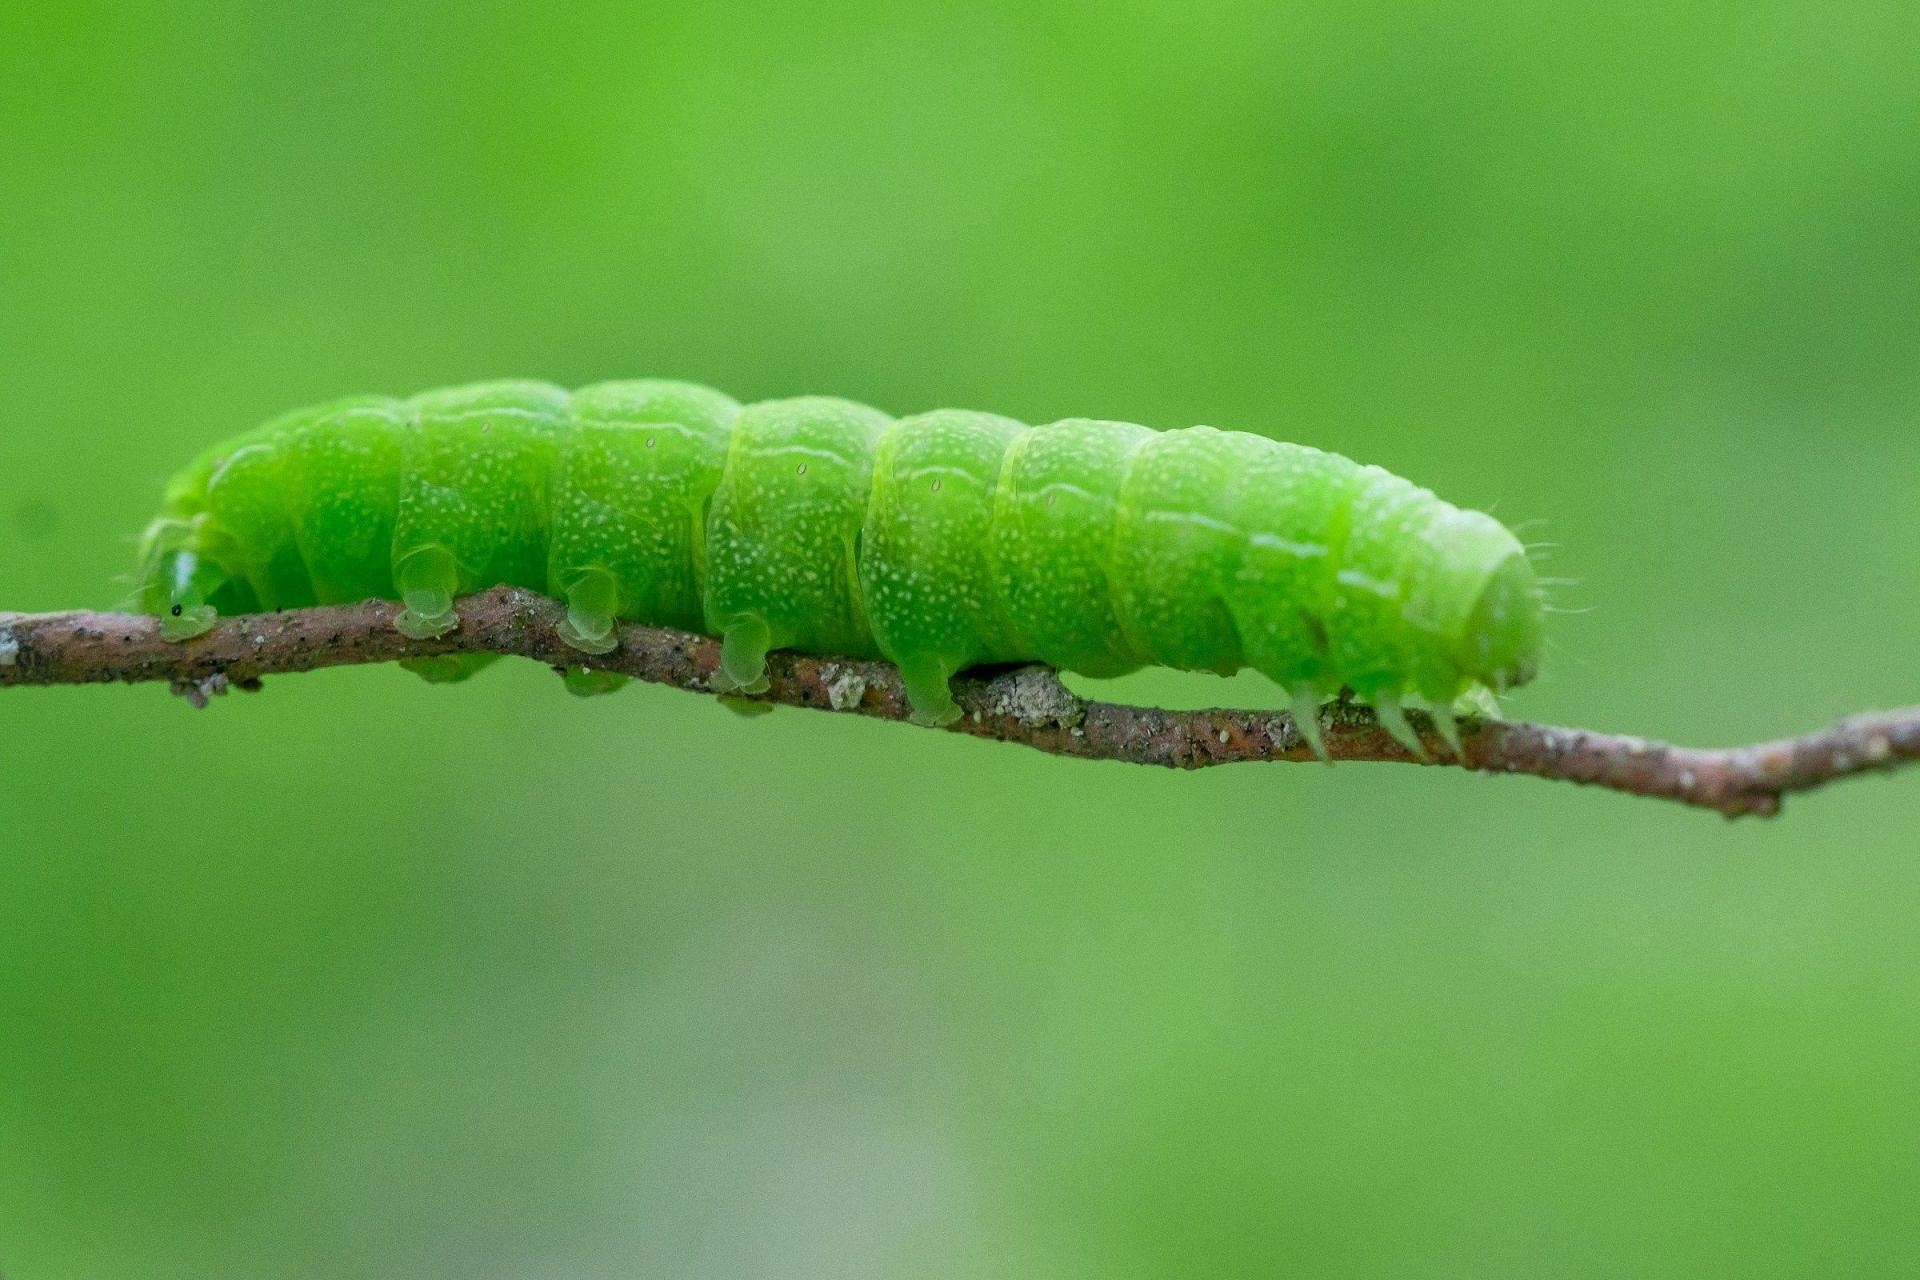 the causes and symptoms of caterpillar rash (Photo by Justin Lauria / Unsplash)